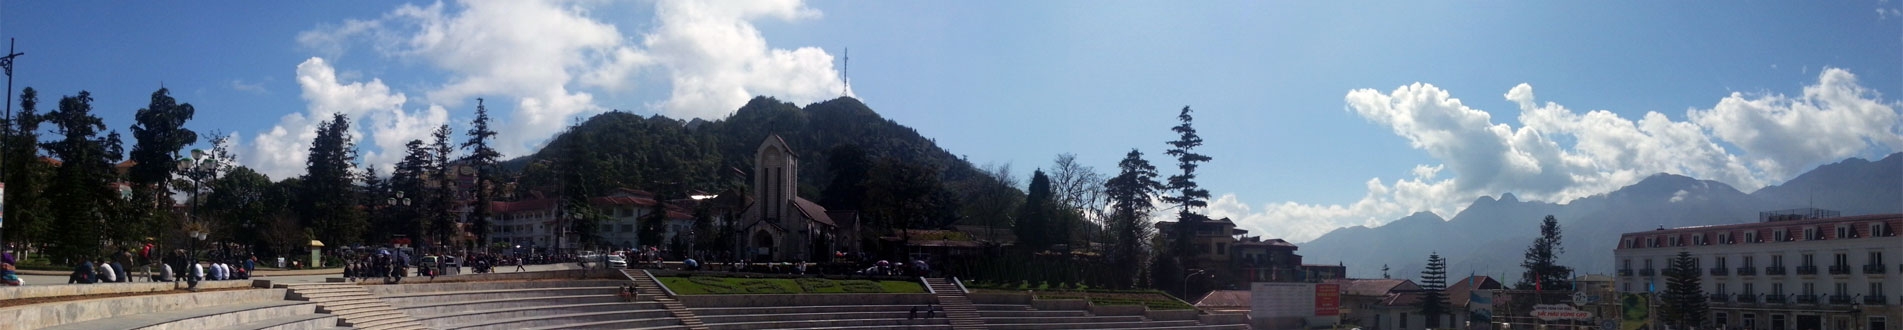 Sapa square with the church